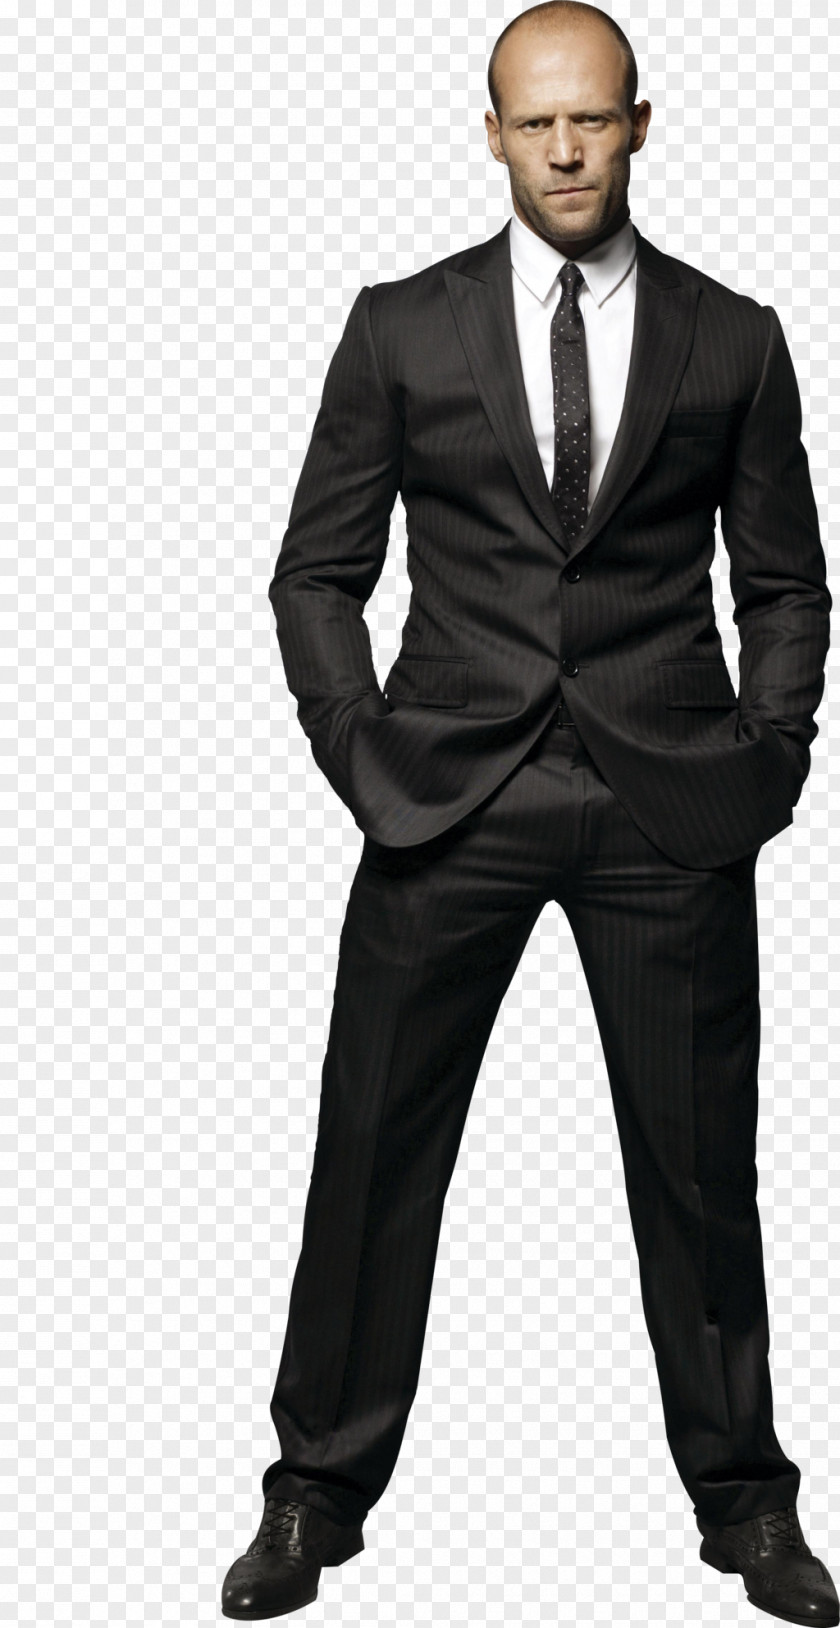 Actor Jason Statham The Transporter Film Series Suit PNG